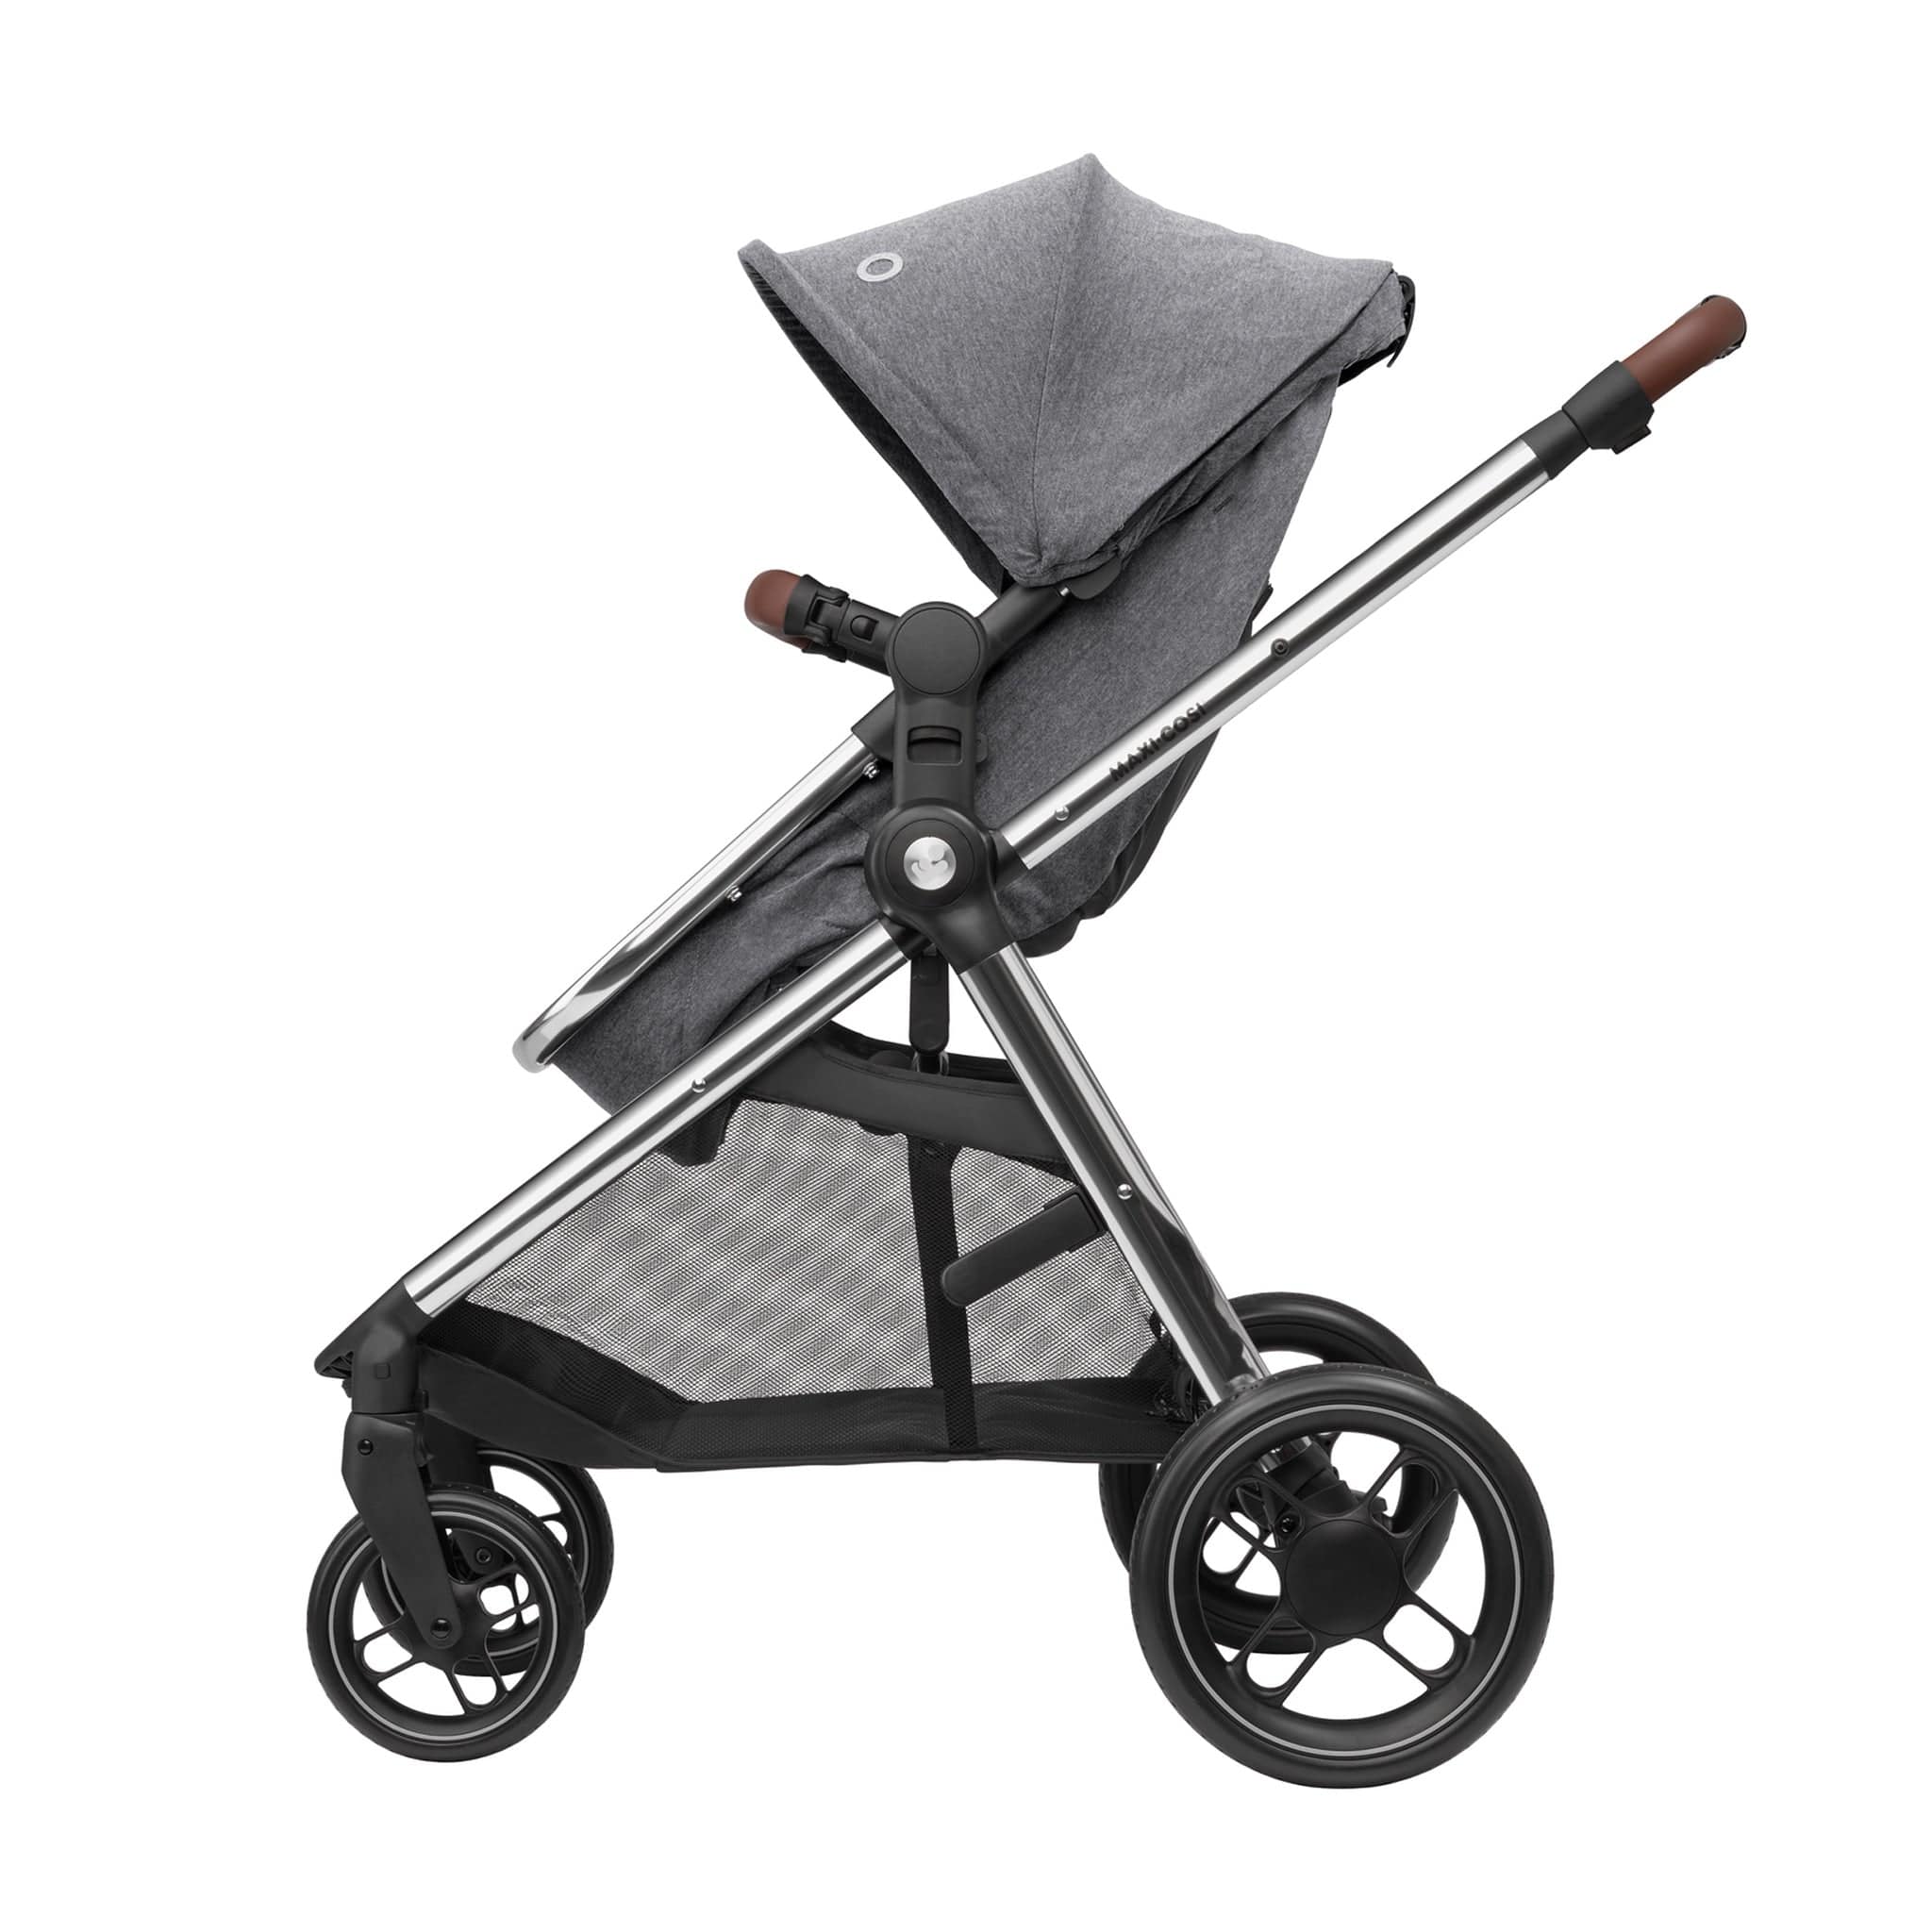 Maxi-Cosi Zelia Luxe with Cabriofix i-Size & Base Travel System in Twillic Grey Travel Systems 11072-TWI-GRY 3220660337965